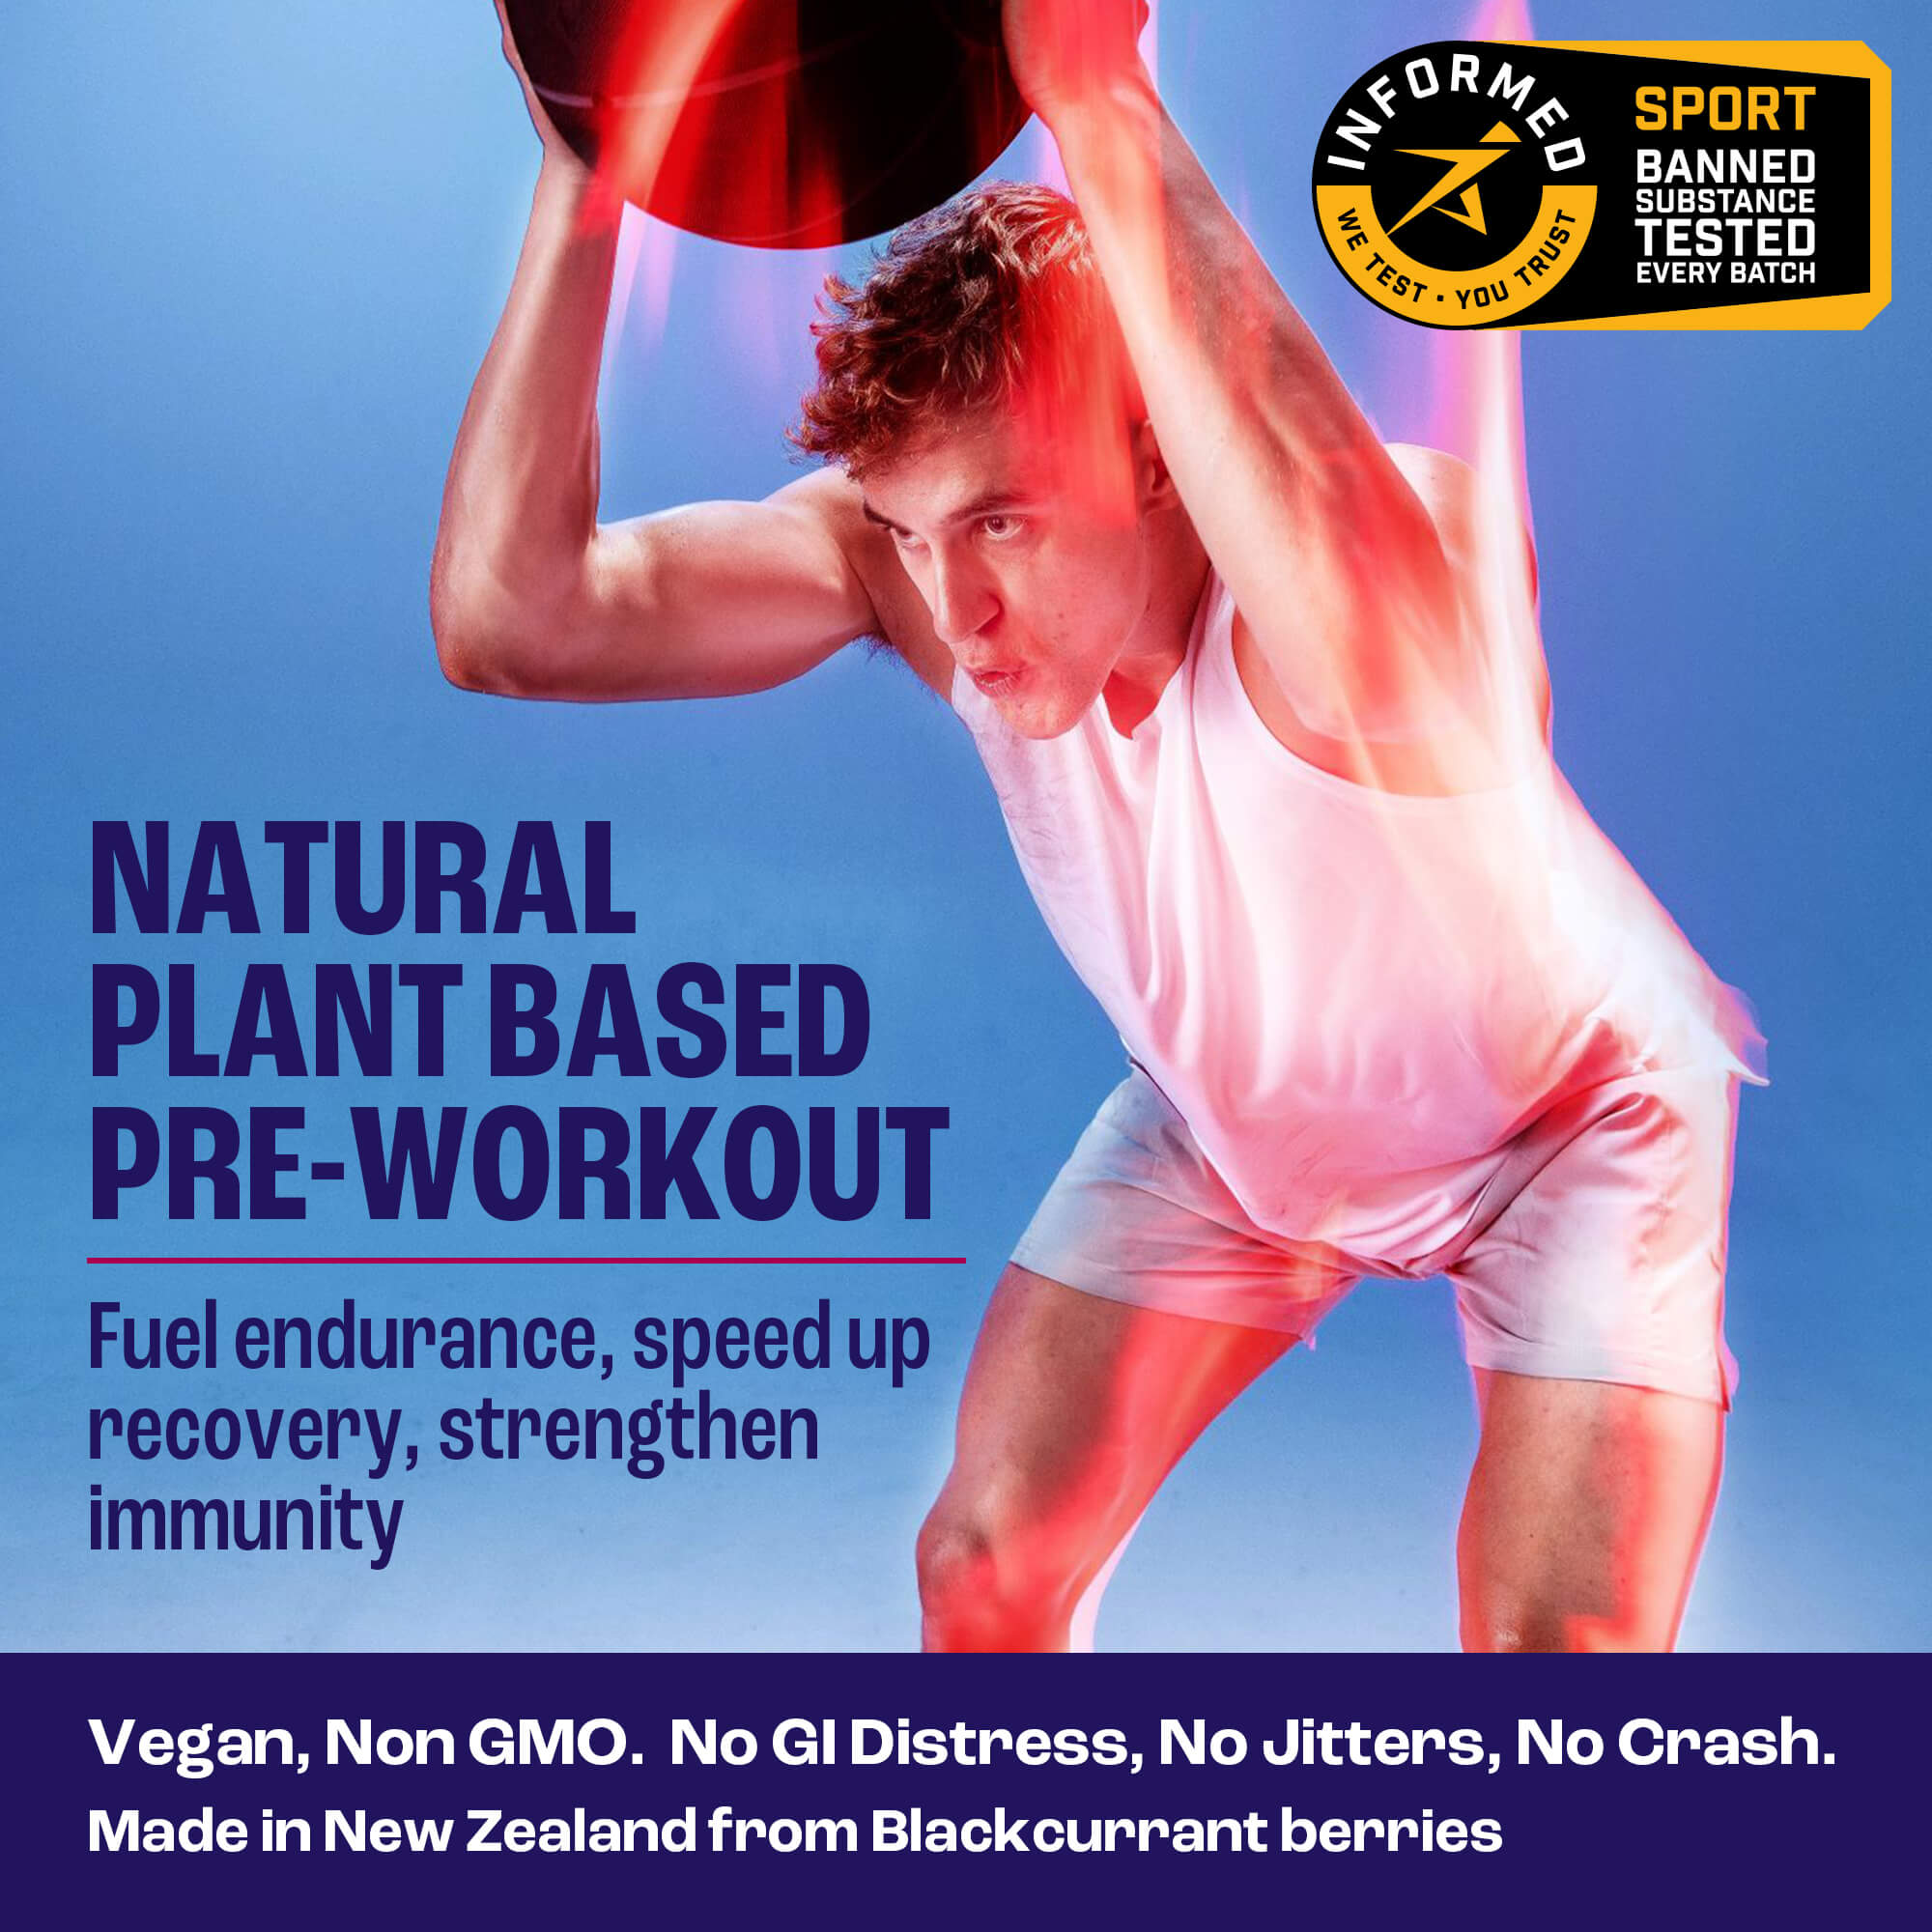 Sample – Blackcurrant Pre Workout - Caffeinated